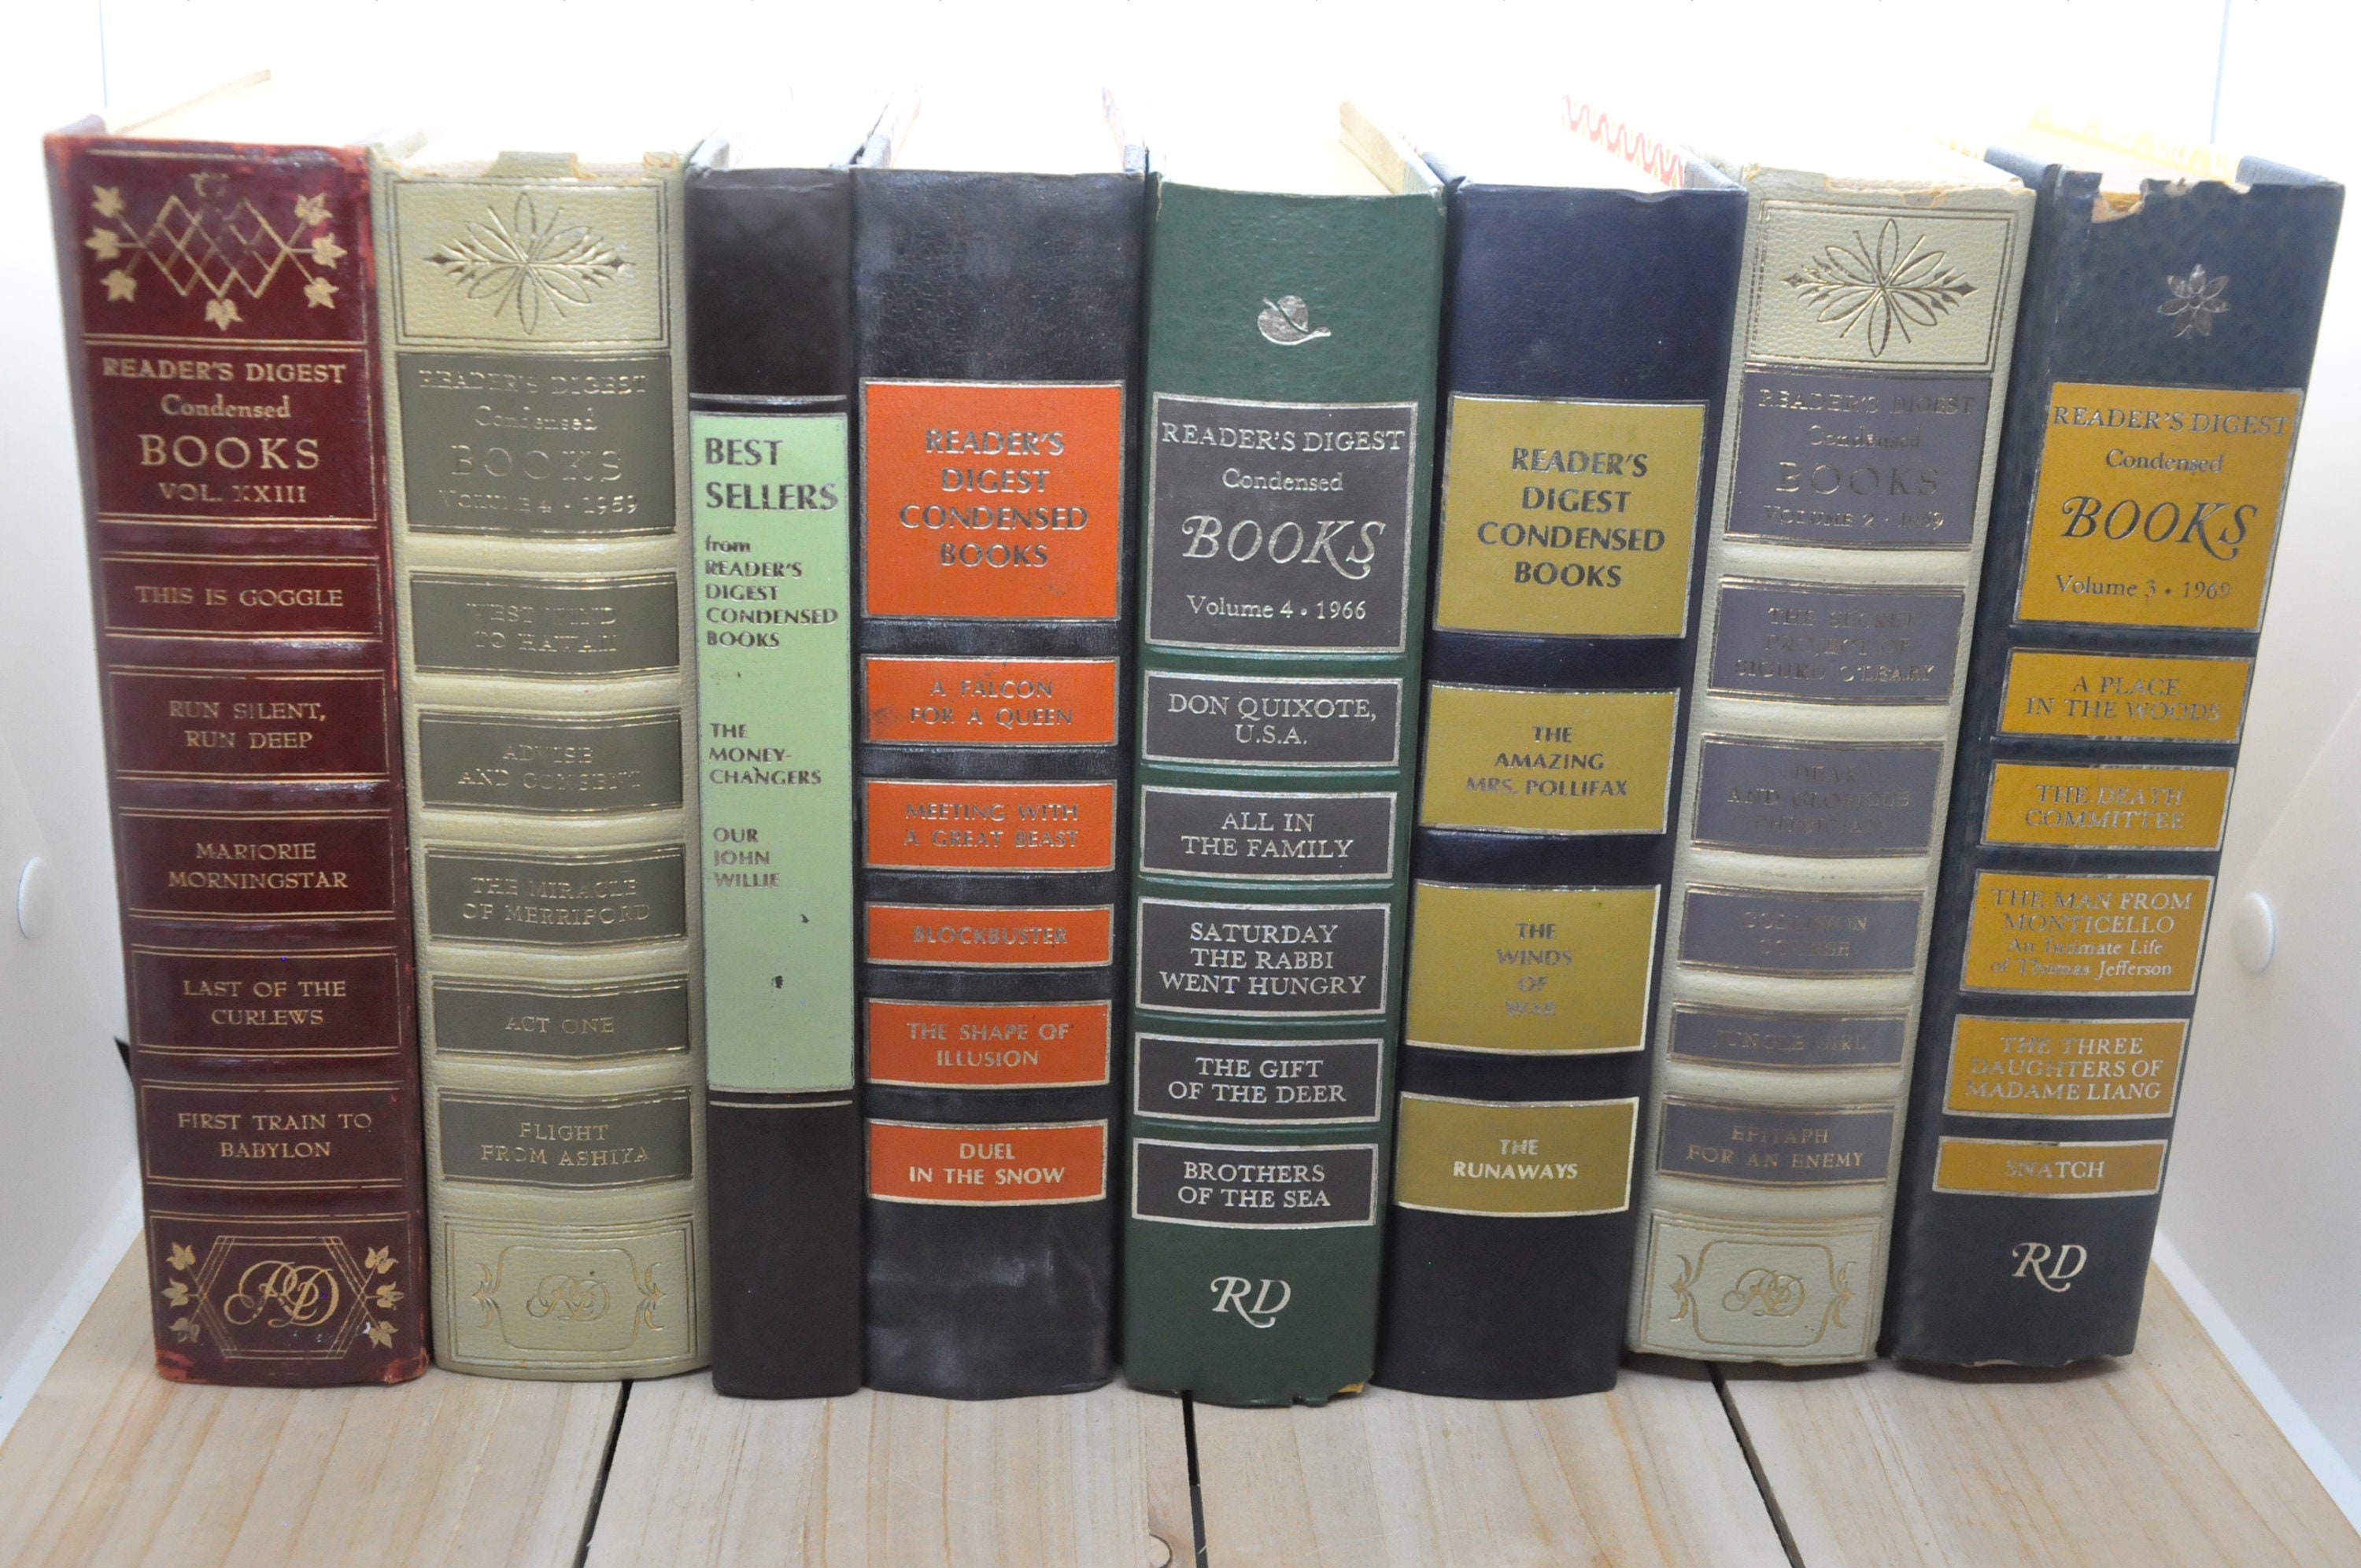 1966 Best Sellers from Readers Digest Condensed Books First